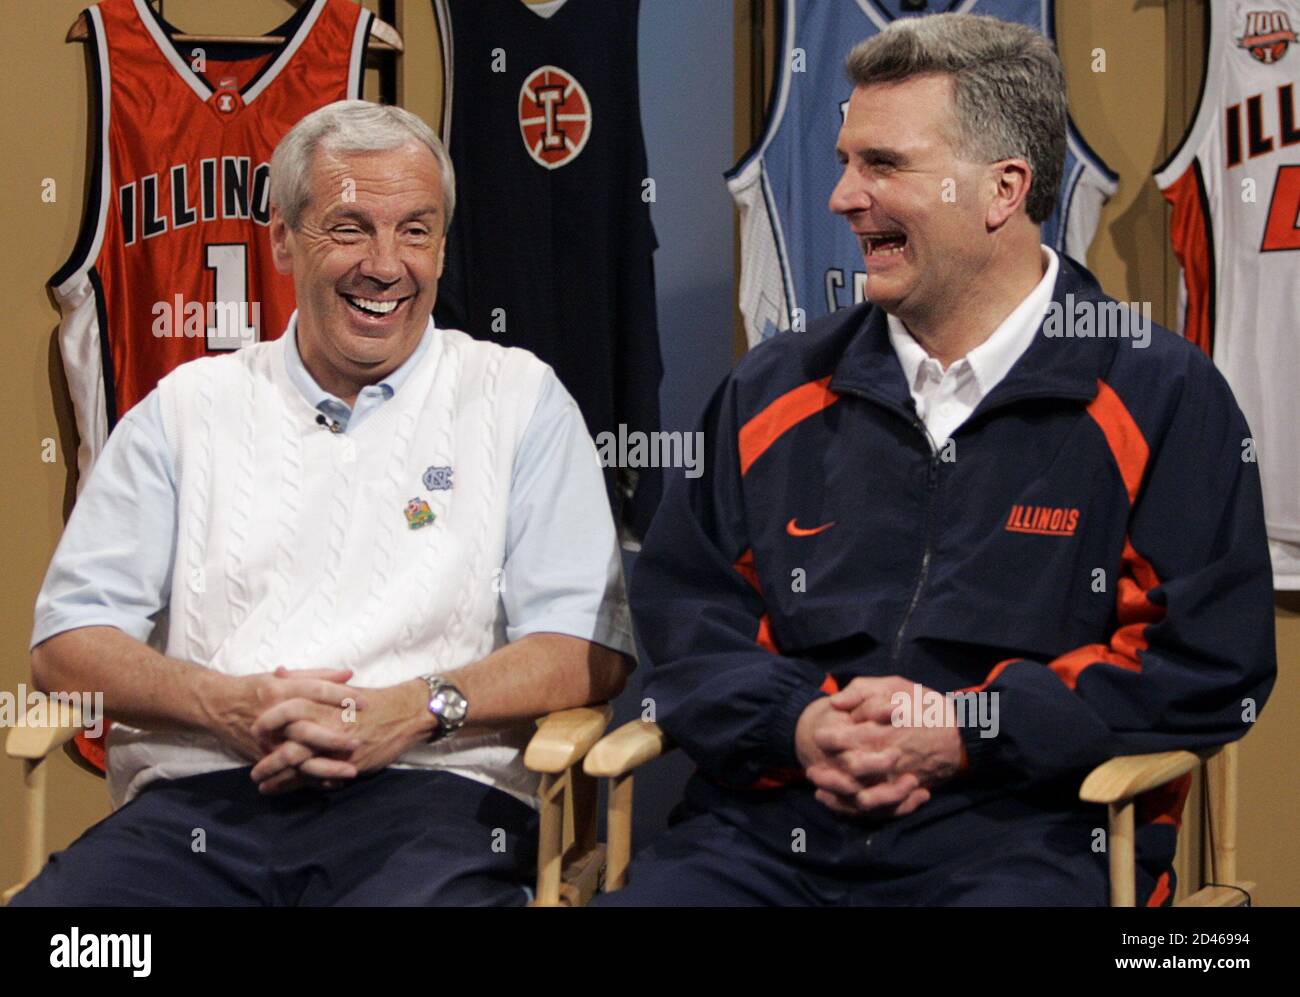 North Carolina coach Williams and Illinois coach Weber sit together before  television interview at NCAA Final Four. North Carolina coach Roy Williams  (L) and Illinois coach Bruce Weber (R) sit together before